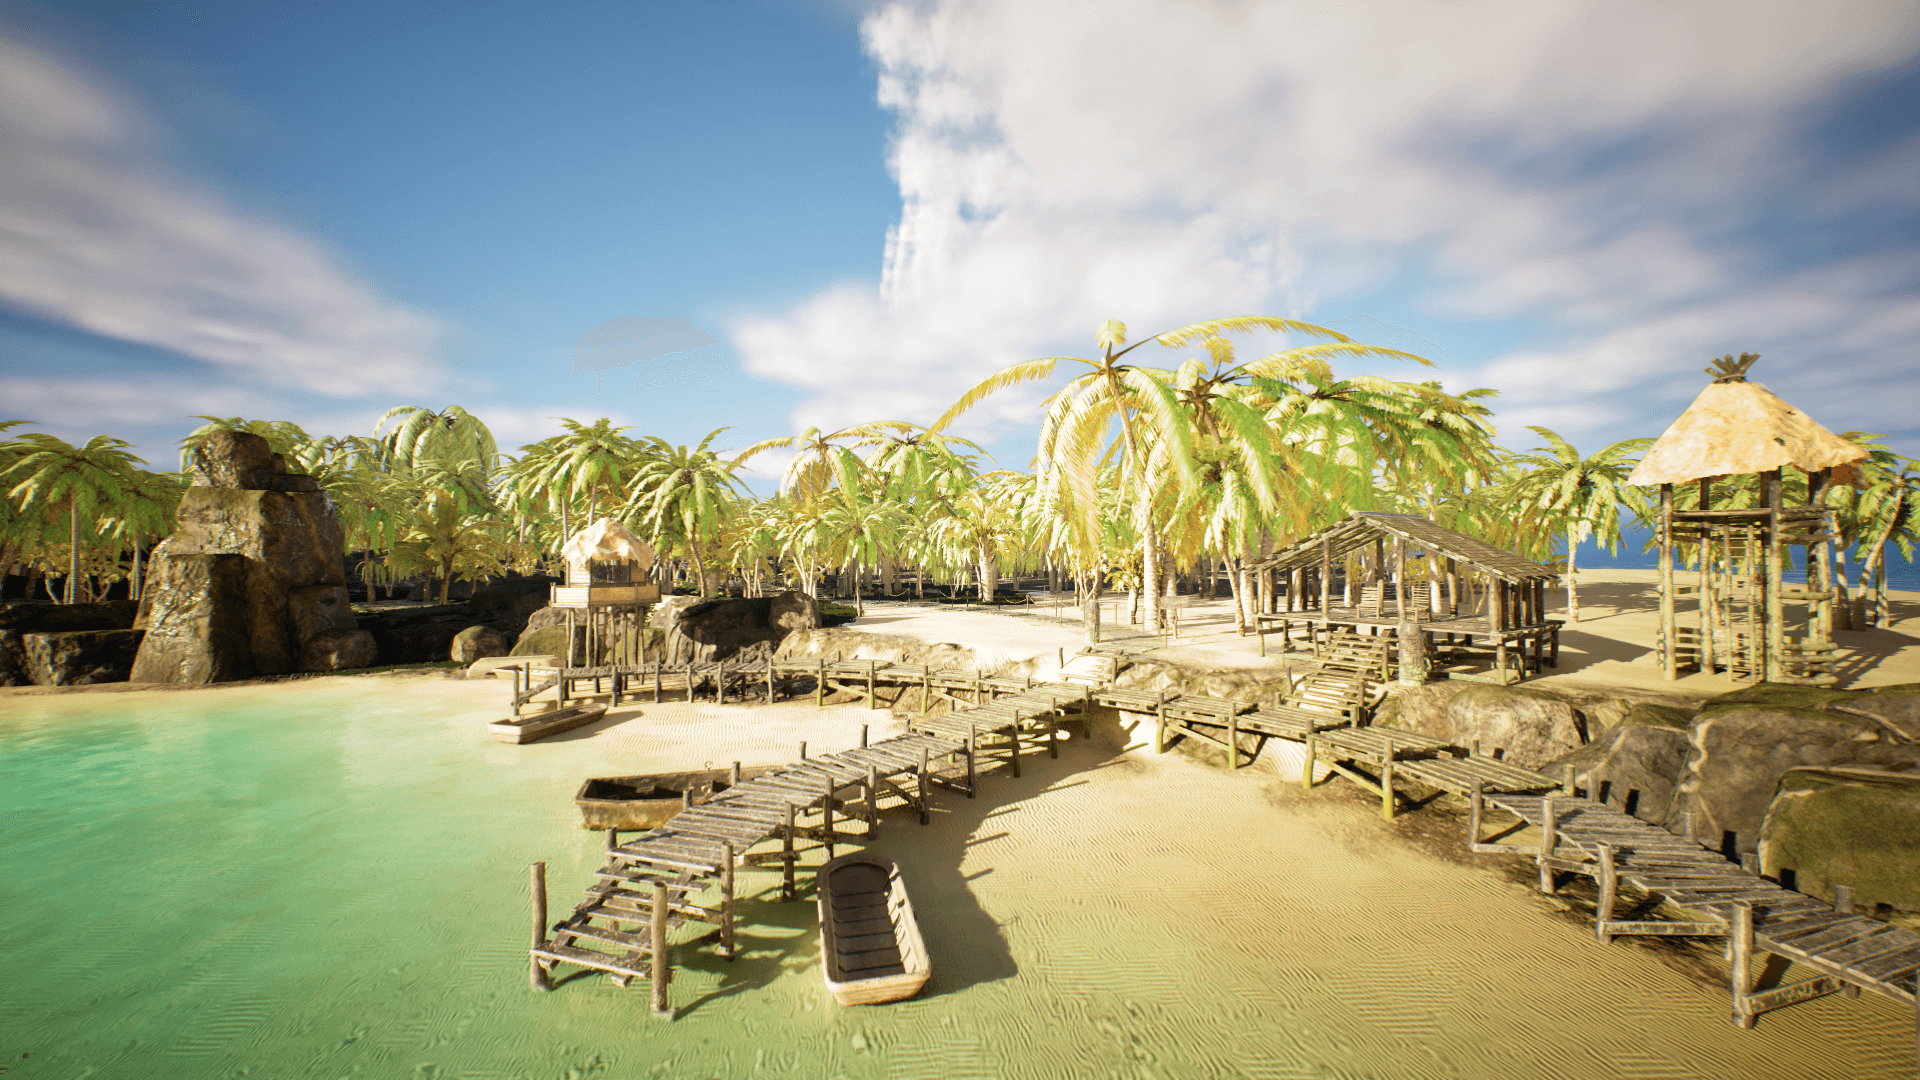 An image showing the Tropical Tiki Island asset pack, created with Unreal Engine